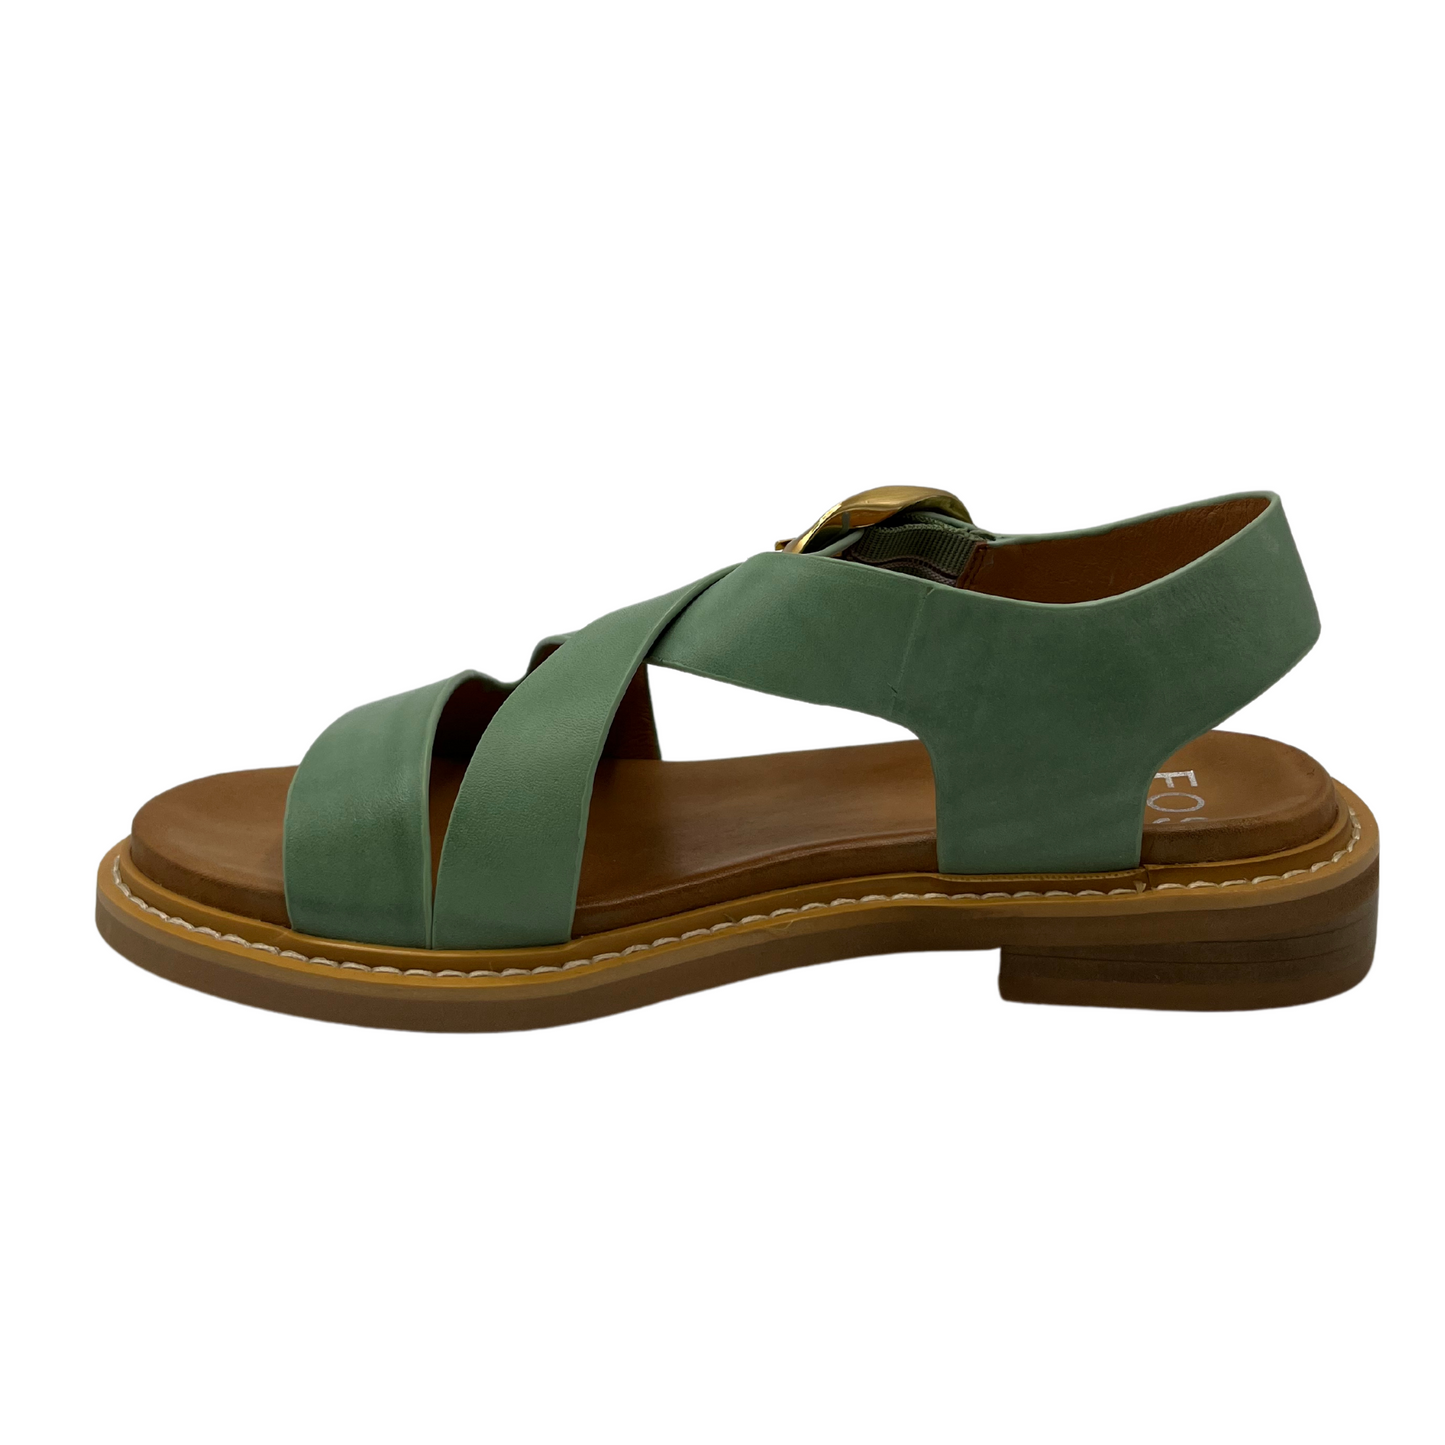 Left facing view of basil coloured leather sandal with low heel and buckle closure